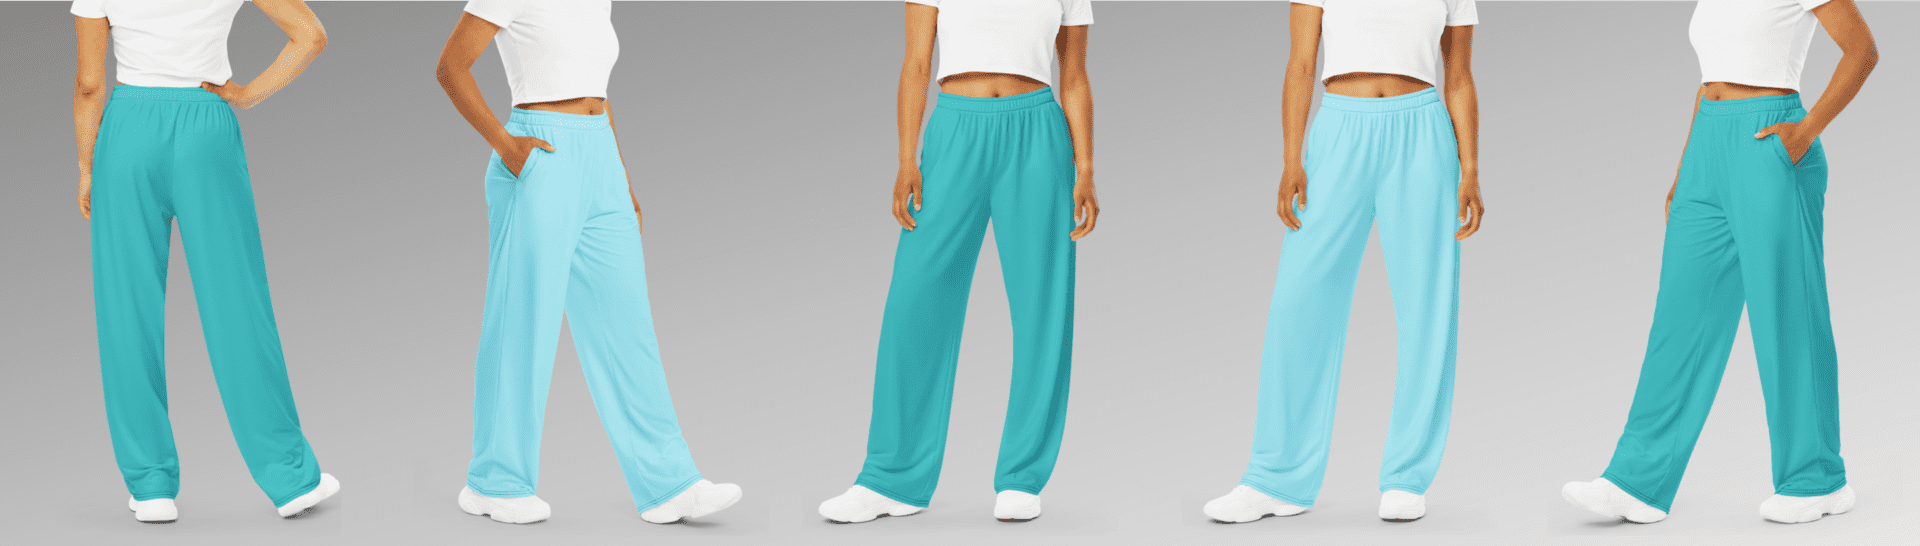 Five women wearing turquoise and blue pants.